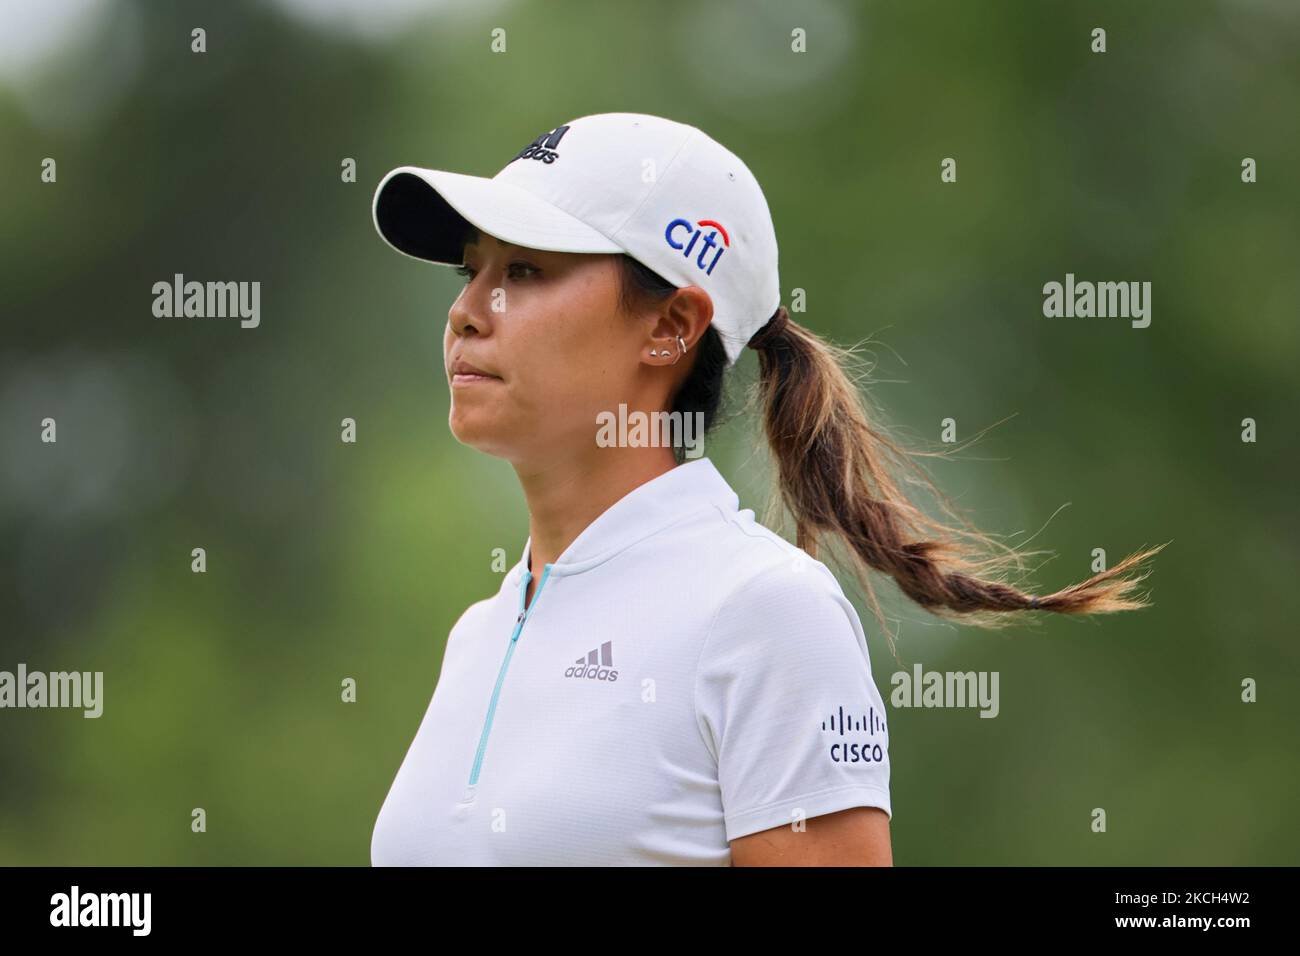 Danielle Kang of Las Vegas, Nevada runs up to the 17th green to pick up her ball during the third round of the Marathon LPGA Classic golf tournament at Highland Meadows Golf Club in Sylvania, Ohio, USA Saturday, July 10, 2021. (Photo by Amy Lemus/NurPhoto) Stock Photo